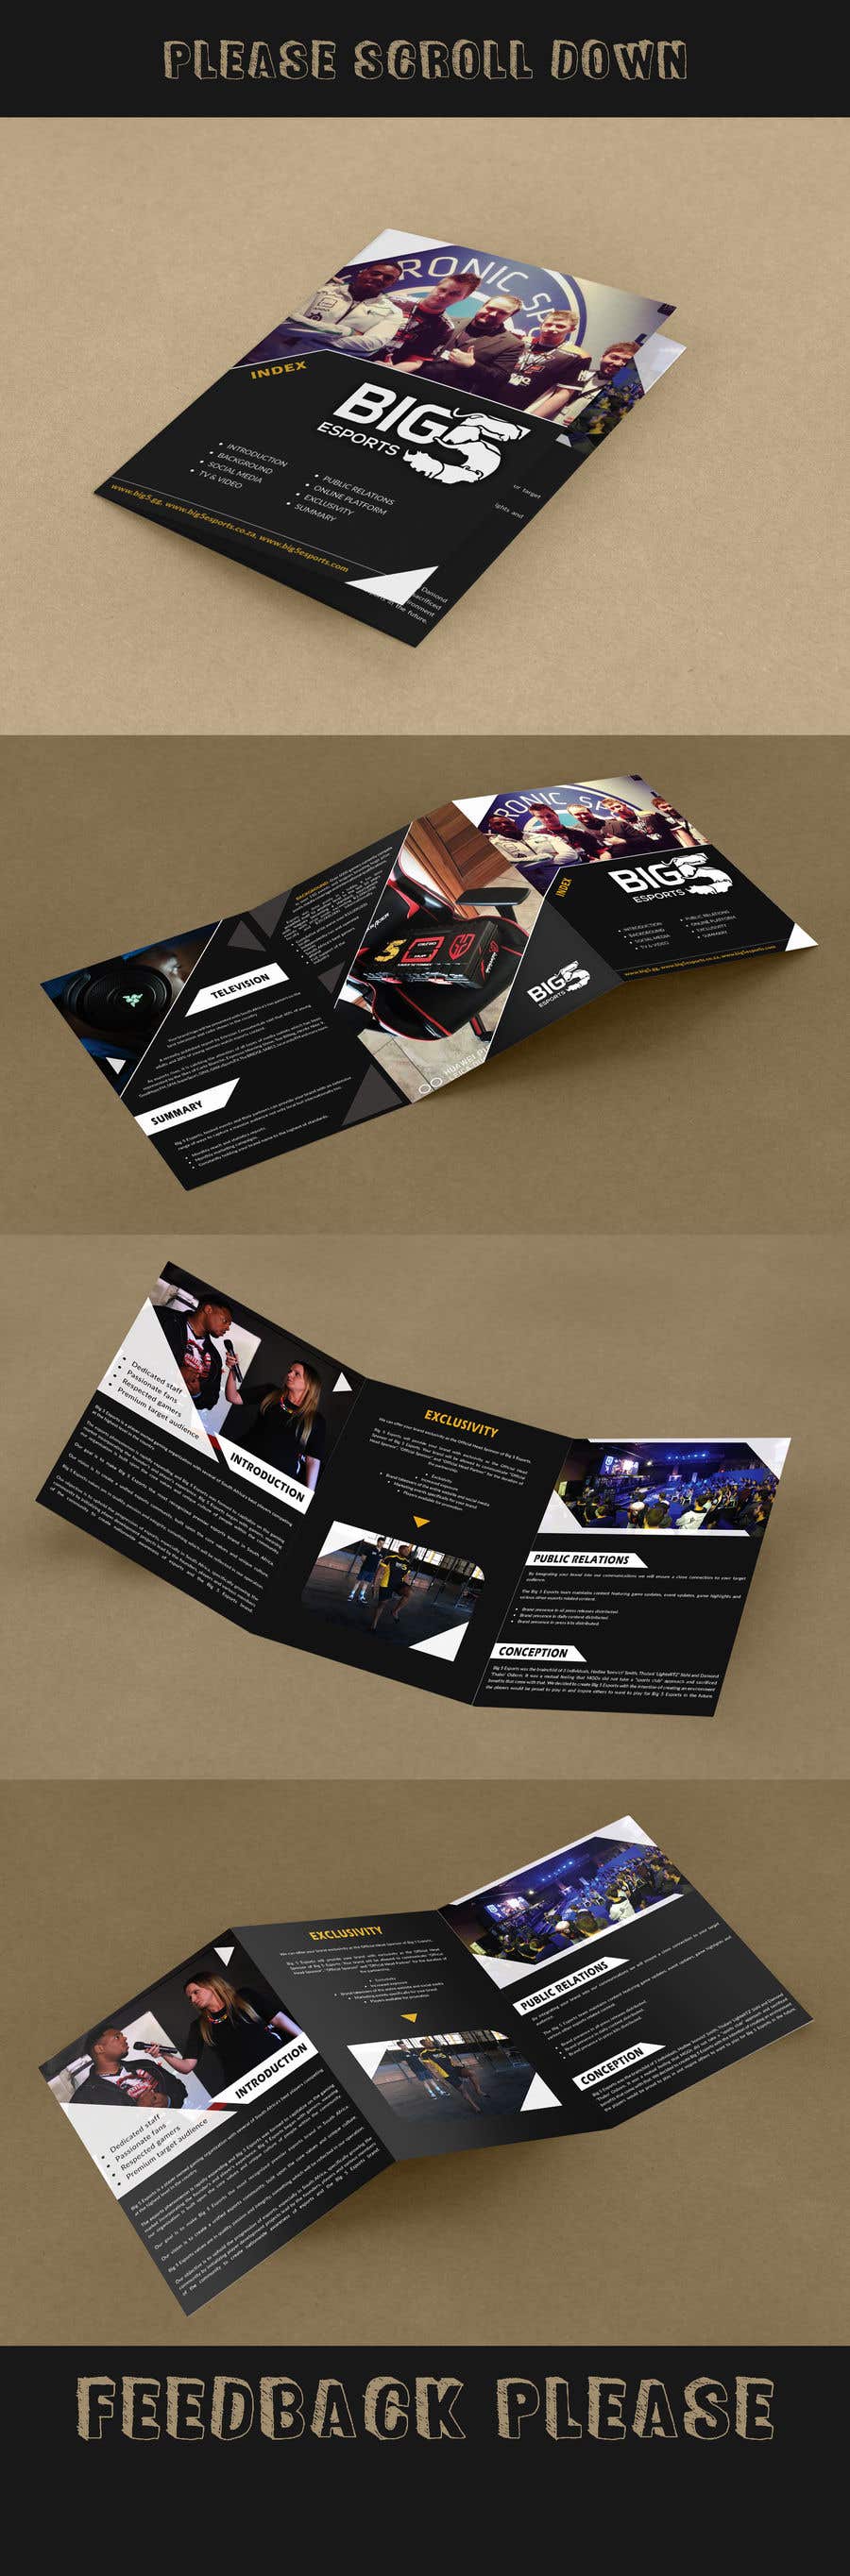 Contest Entry #9 for                                                 Design a Brochure For A Esports Organization
                                            